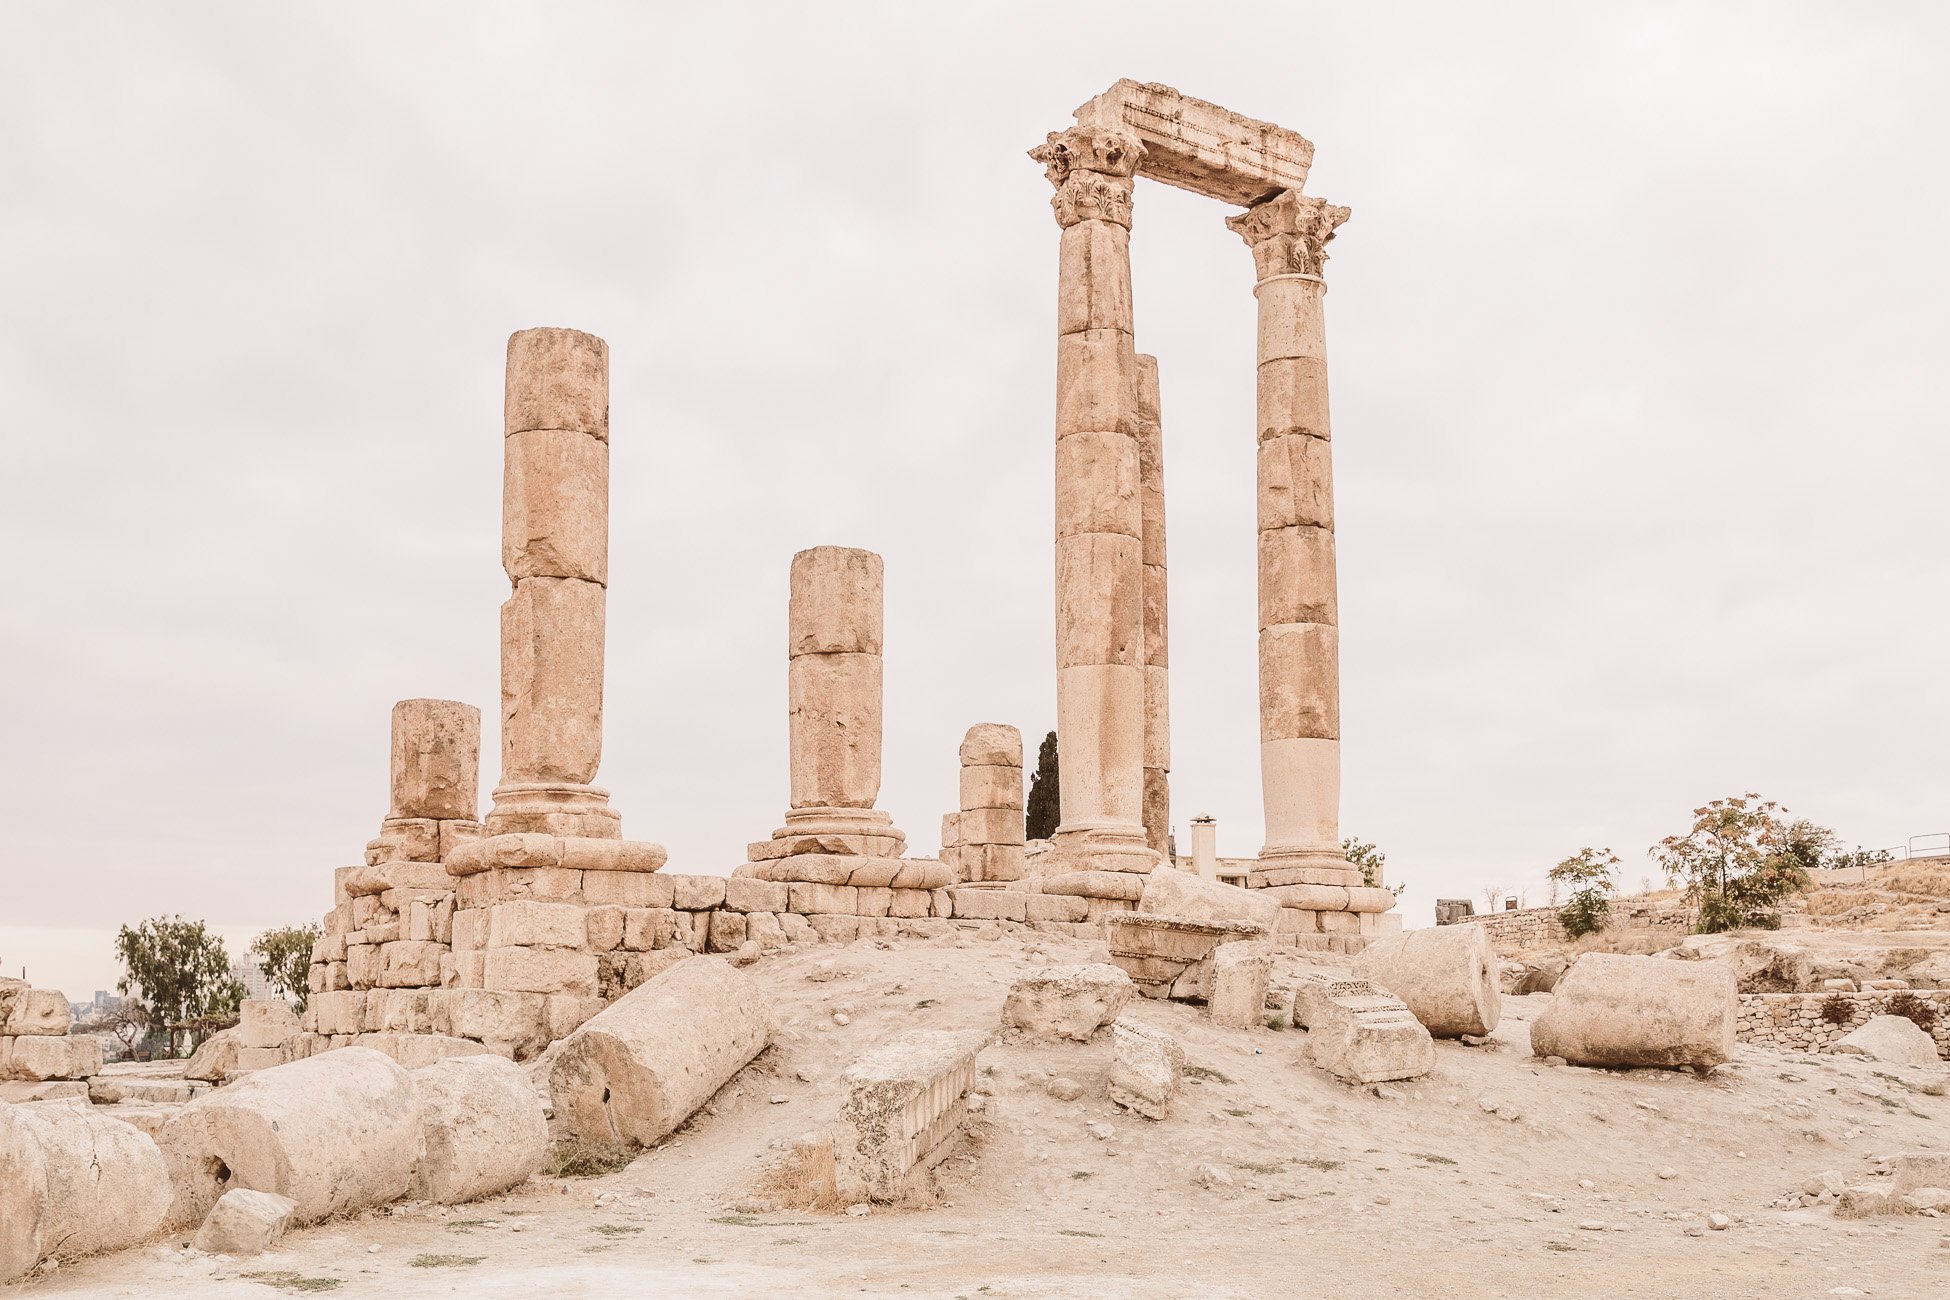 A visit of the Amman Citadel during 24 hours in Amman